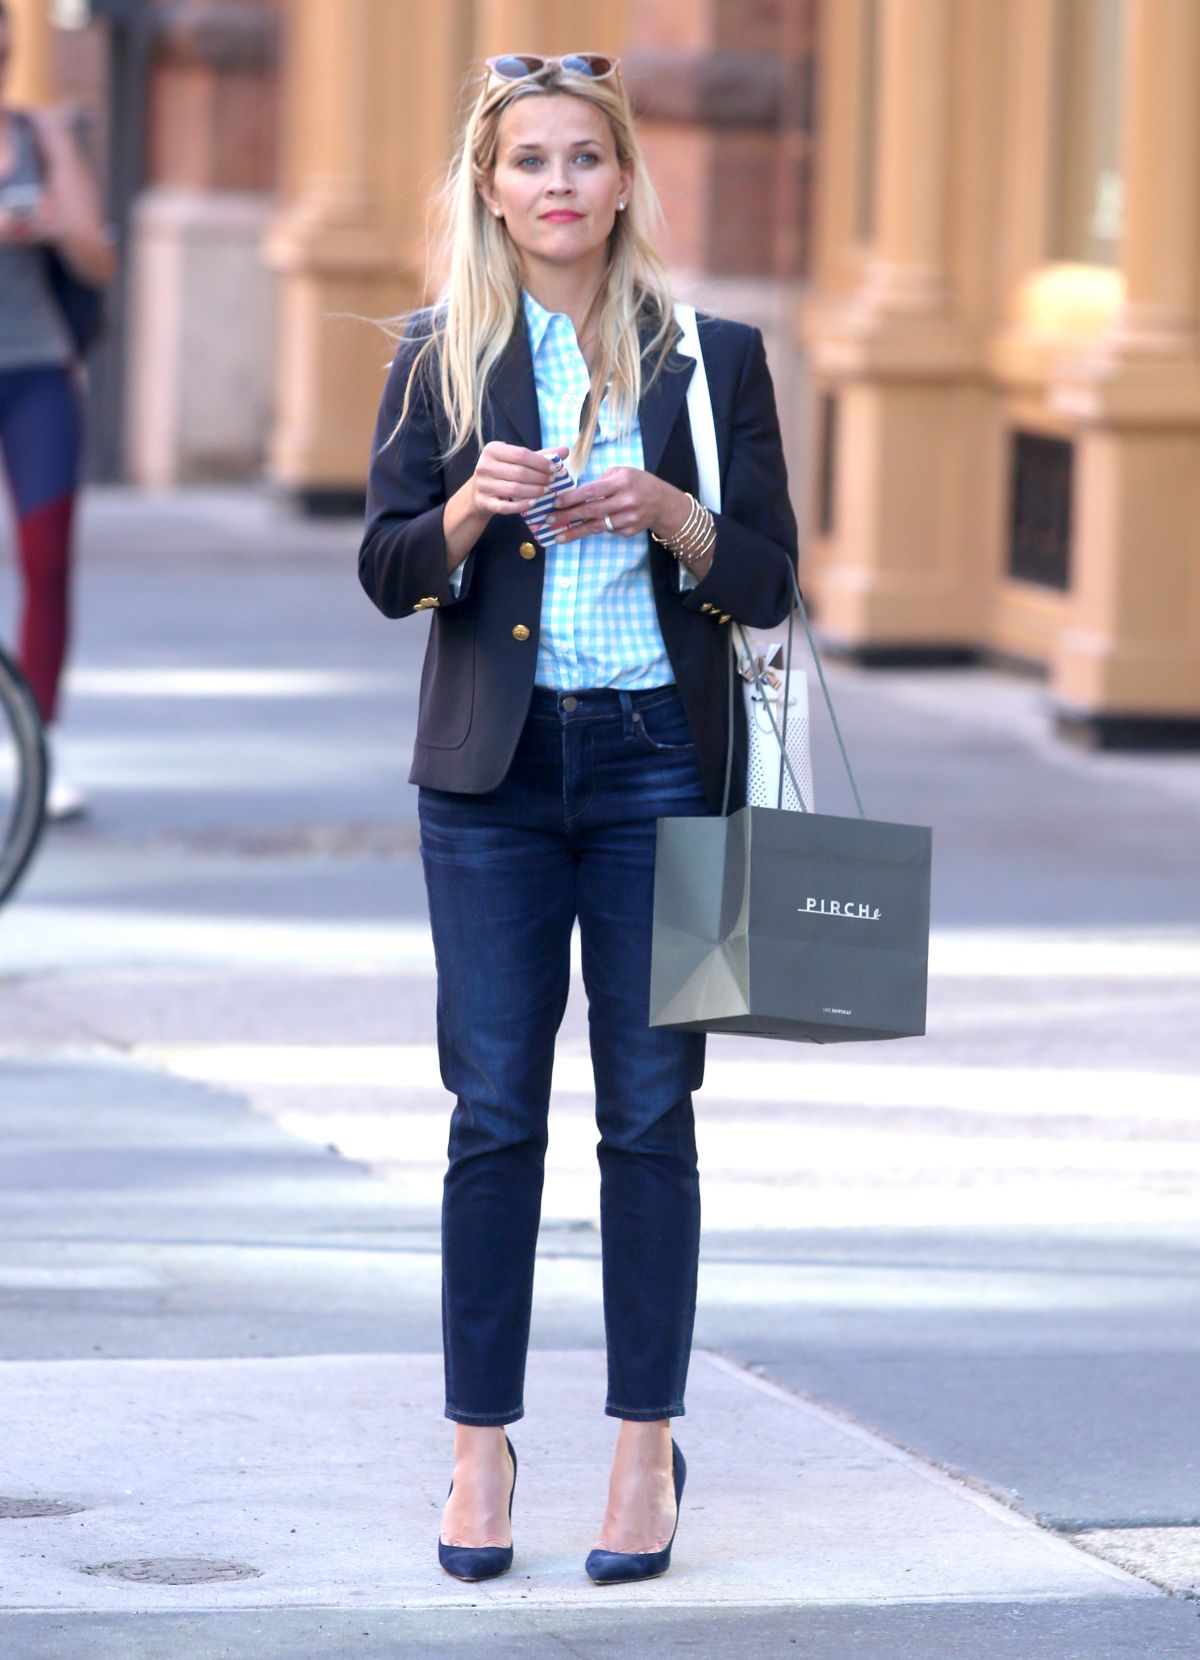 reese-witherspoon-shopping-in-new-york-city-61416-7.jpg